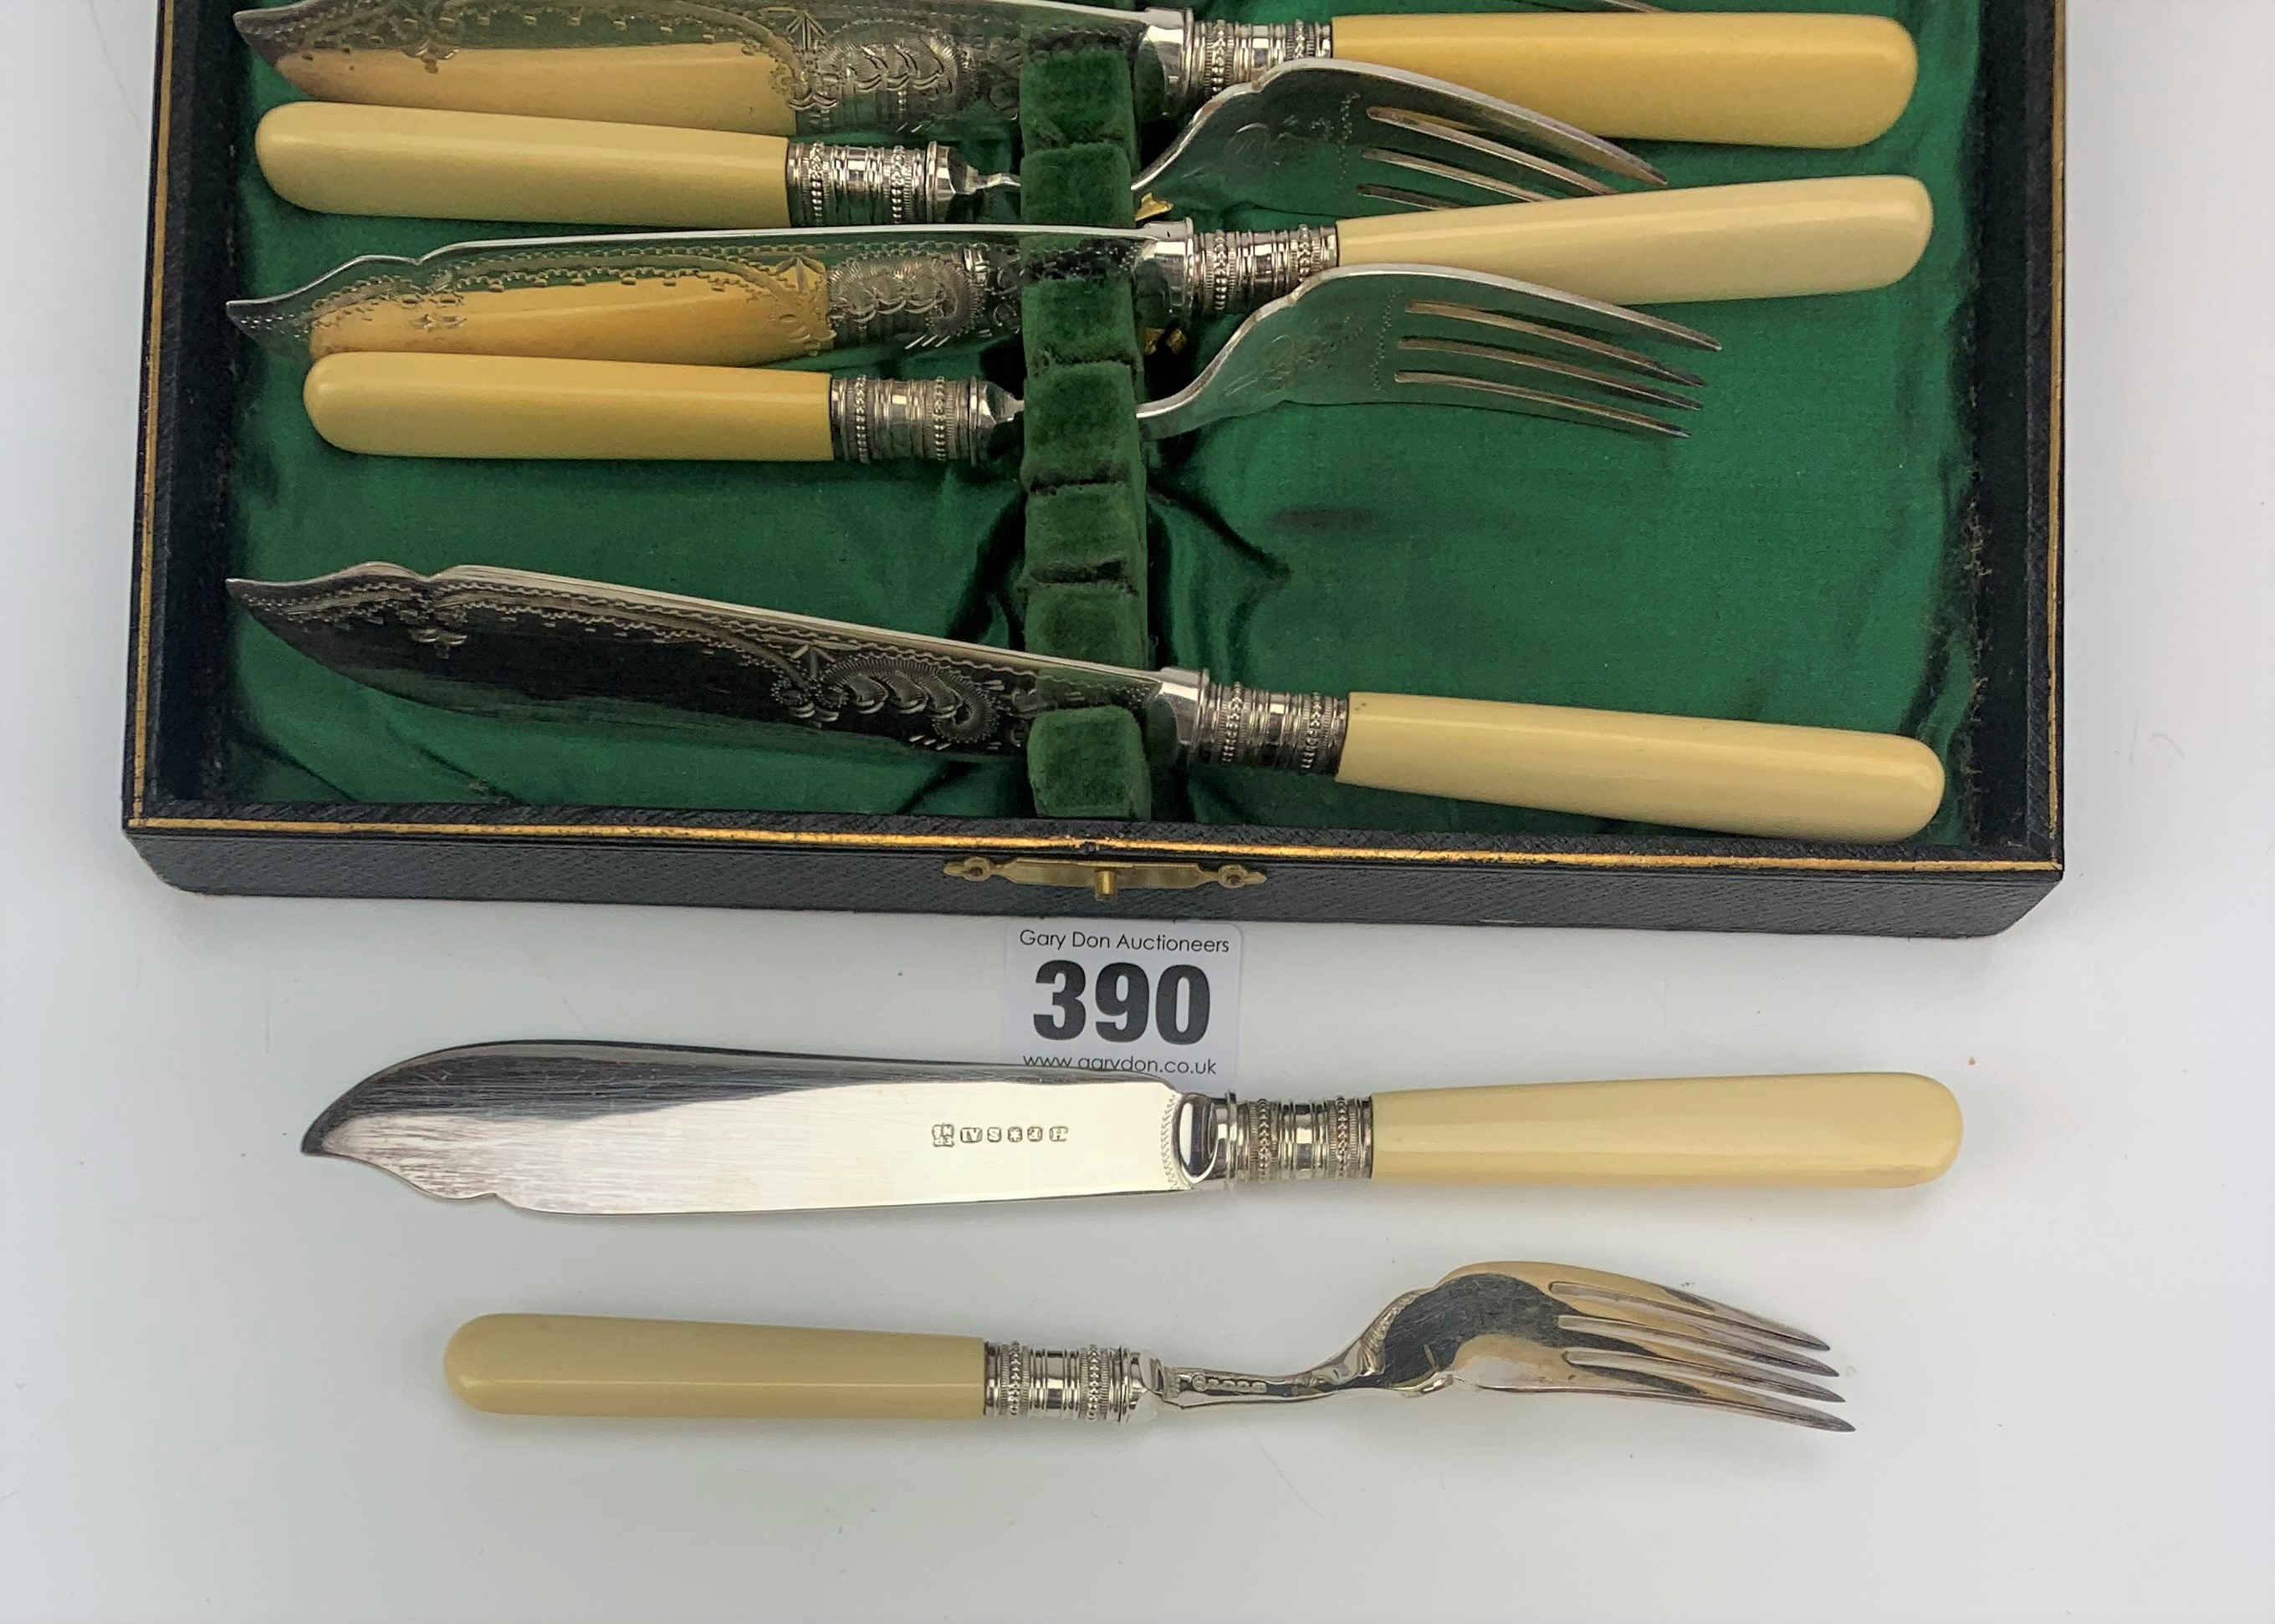 Cased set of 6 plated knives and forks - Image 3 of 4